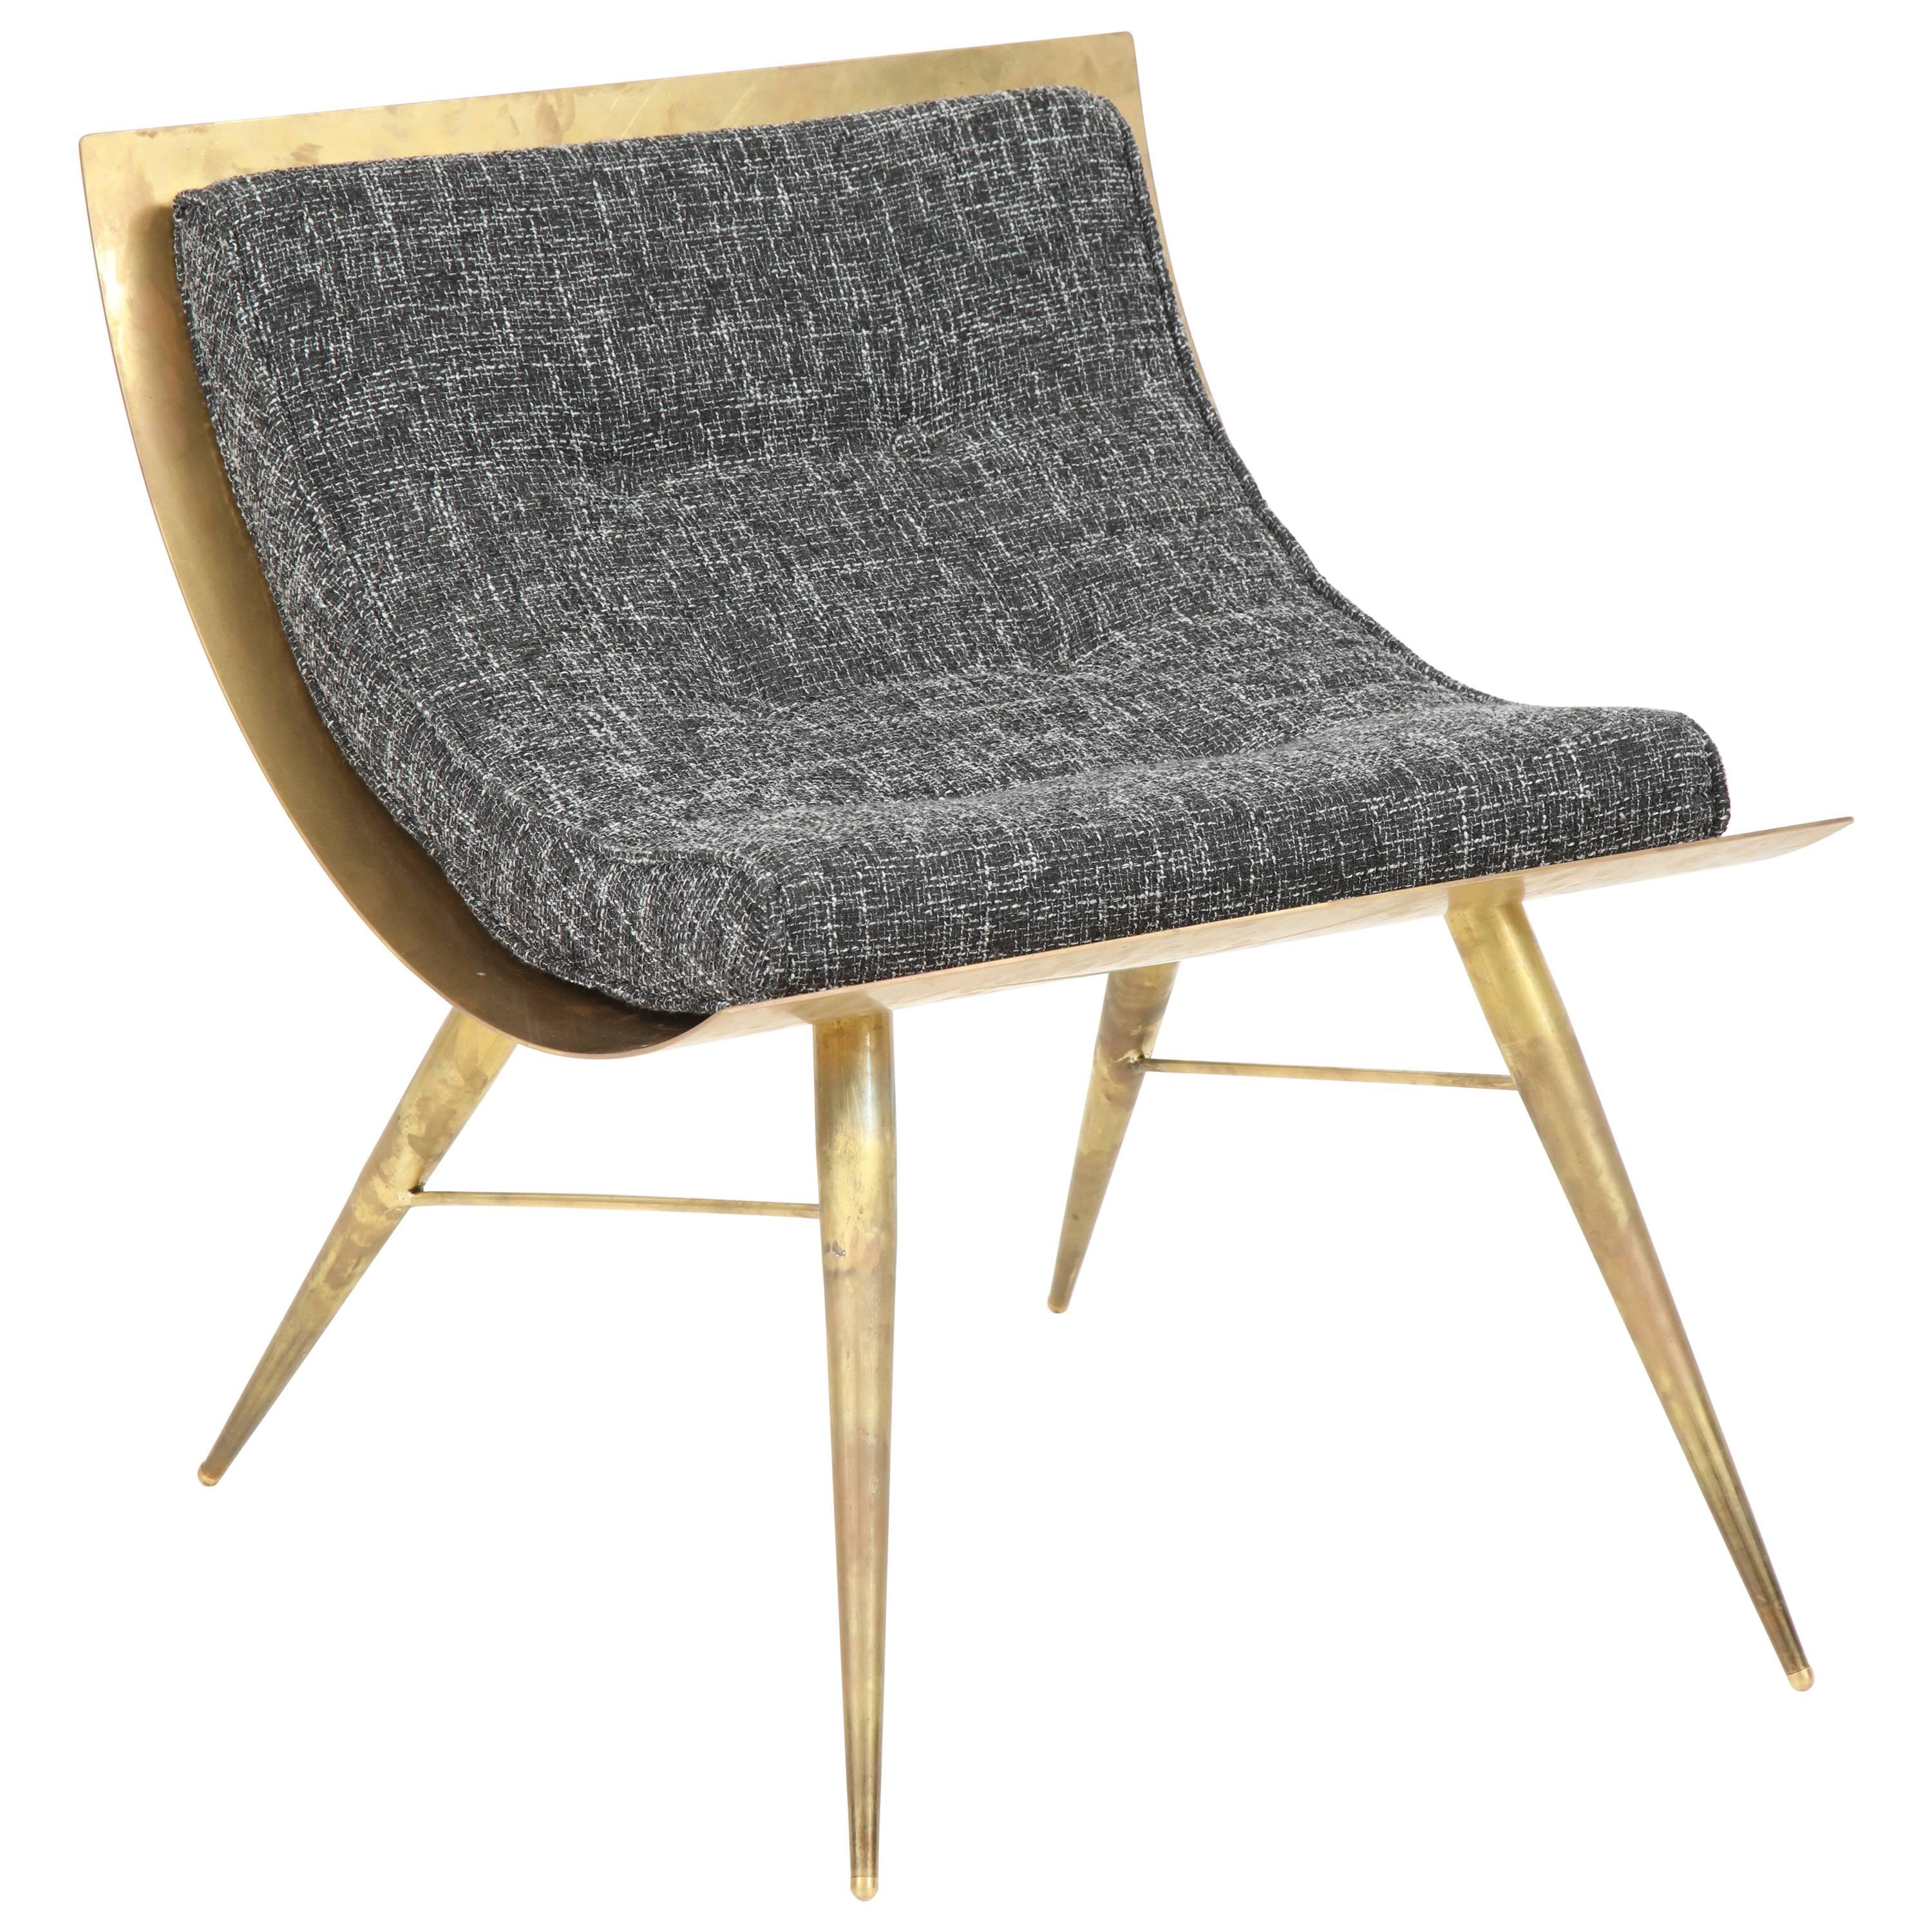 Sculptural Curved Back Solid Brass and Grey Tweed Fabric Accent Chair, Italy